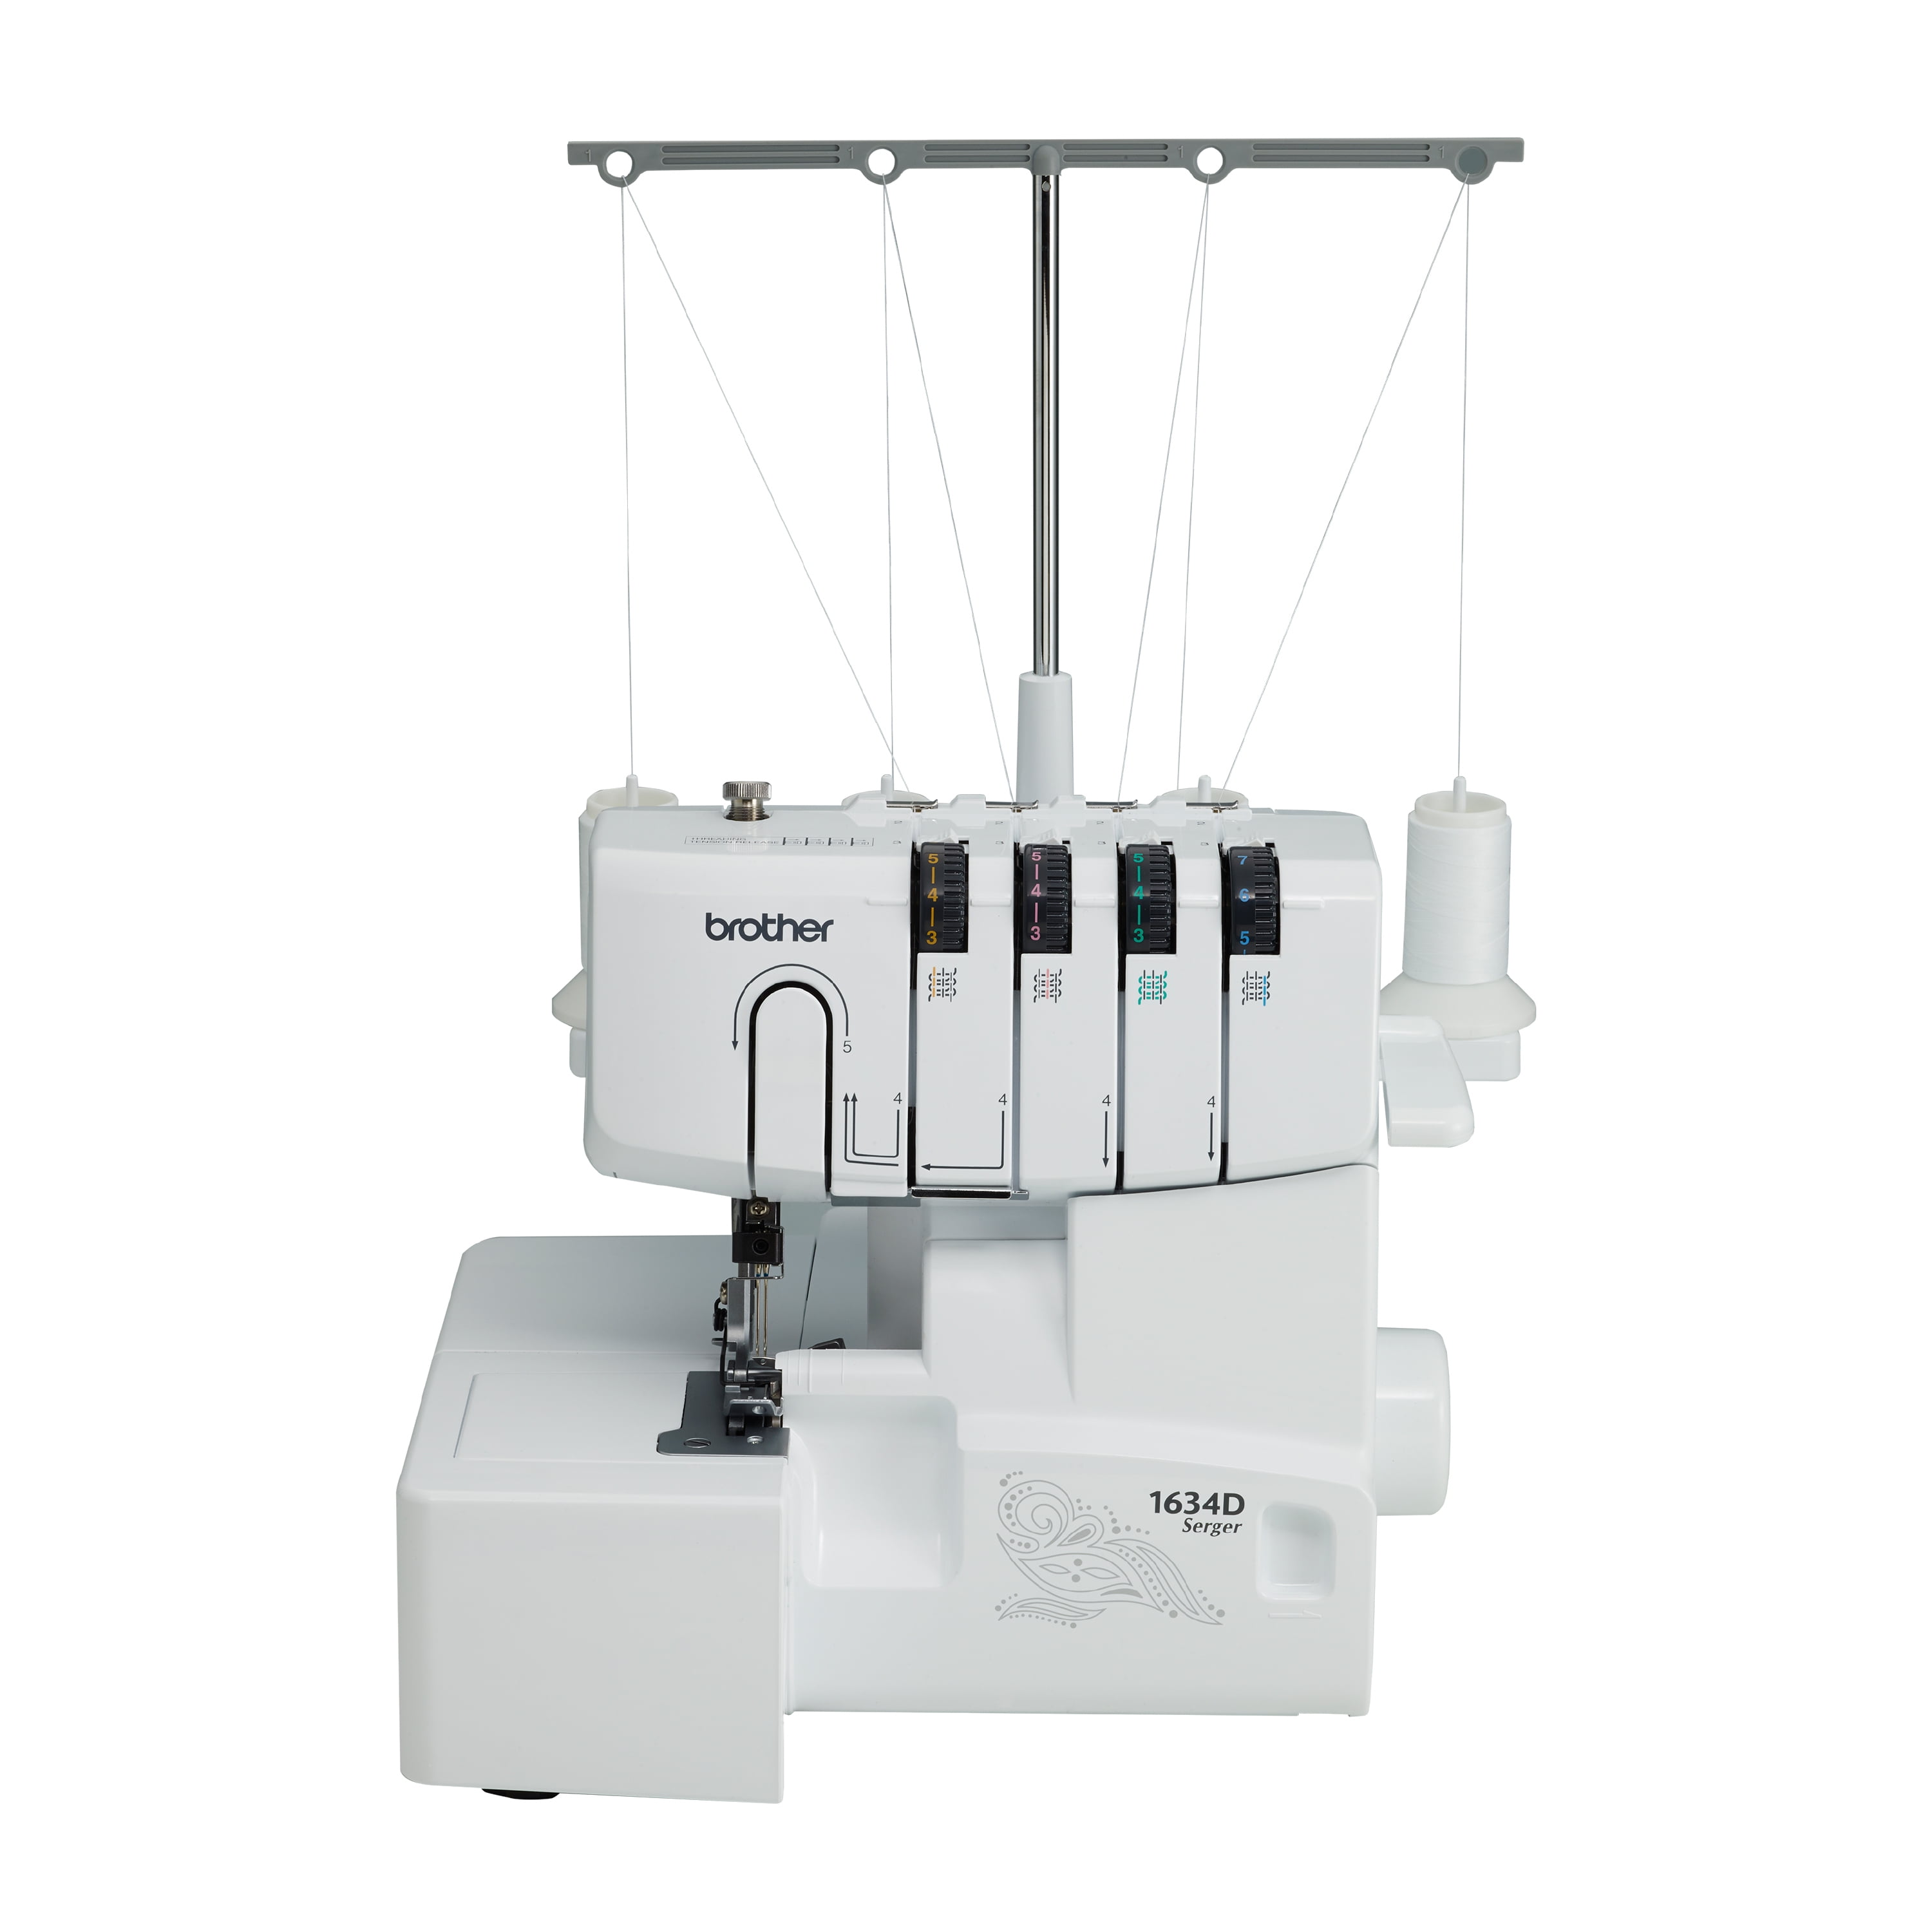 Brother 1634D 3 or 4 Thread Serger with Easy Color-Coded Thread Guide